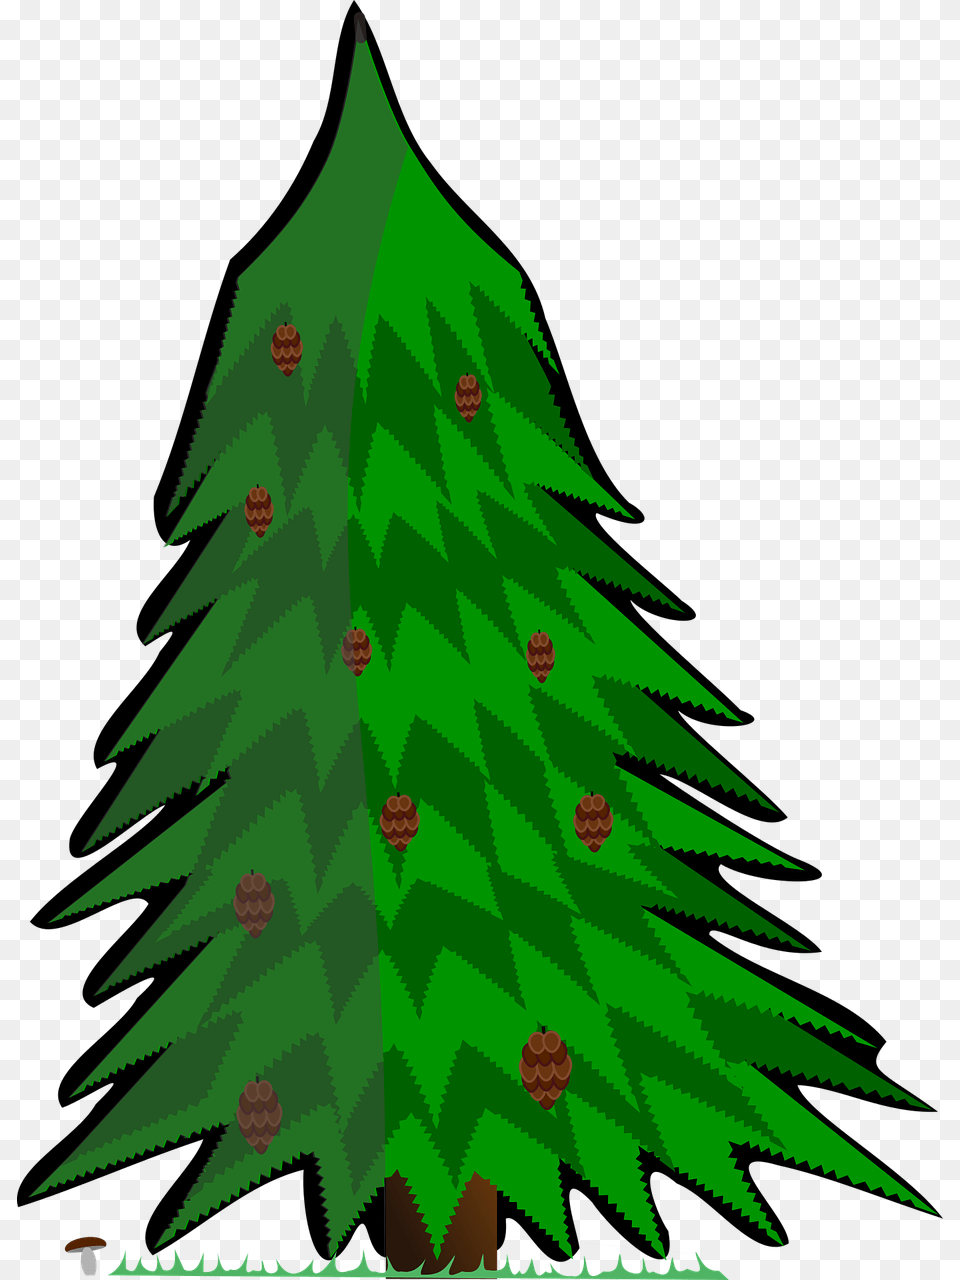 Conifer Vector Tree Picture Kreslen Jehlinat Strom, Plant, Green, Christmas, Christmas Decorations Free Transparent Png